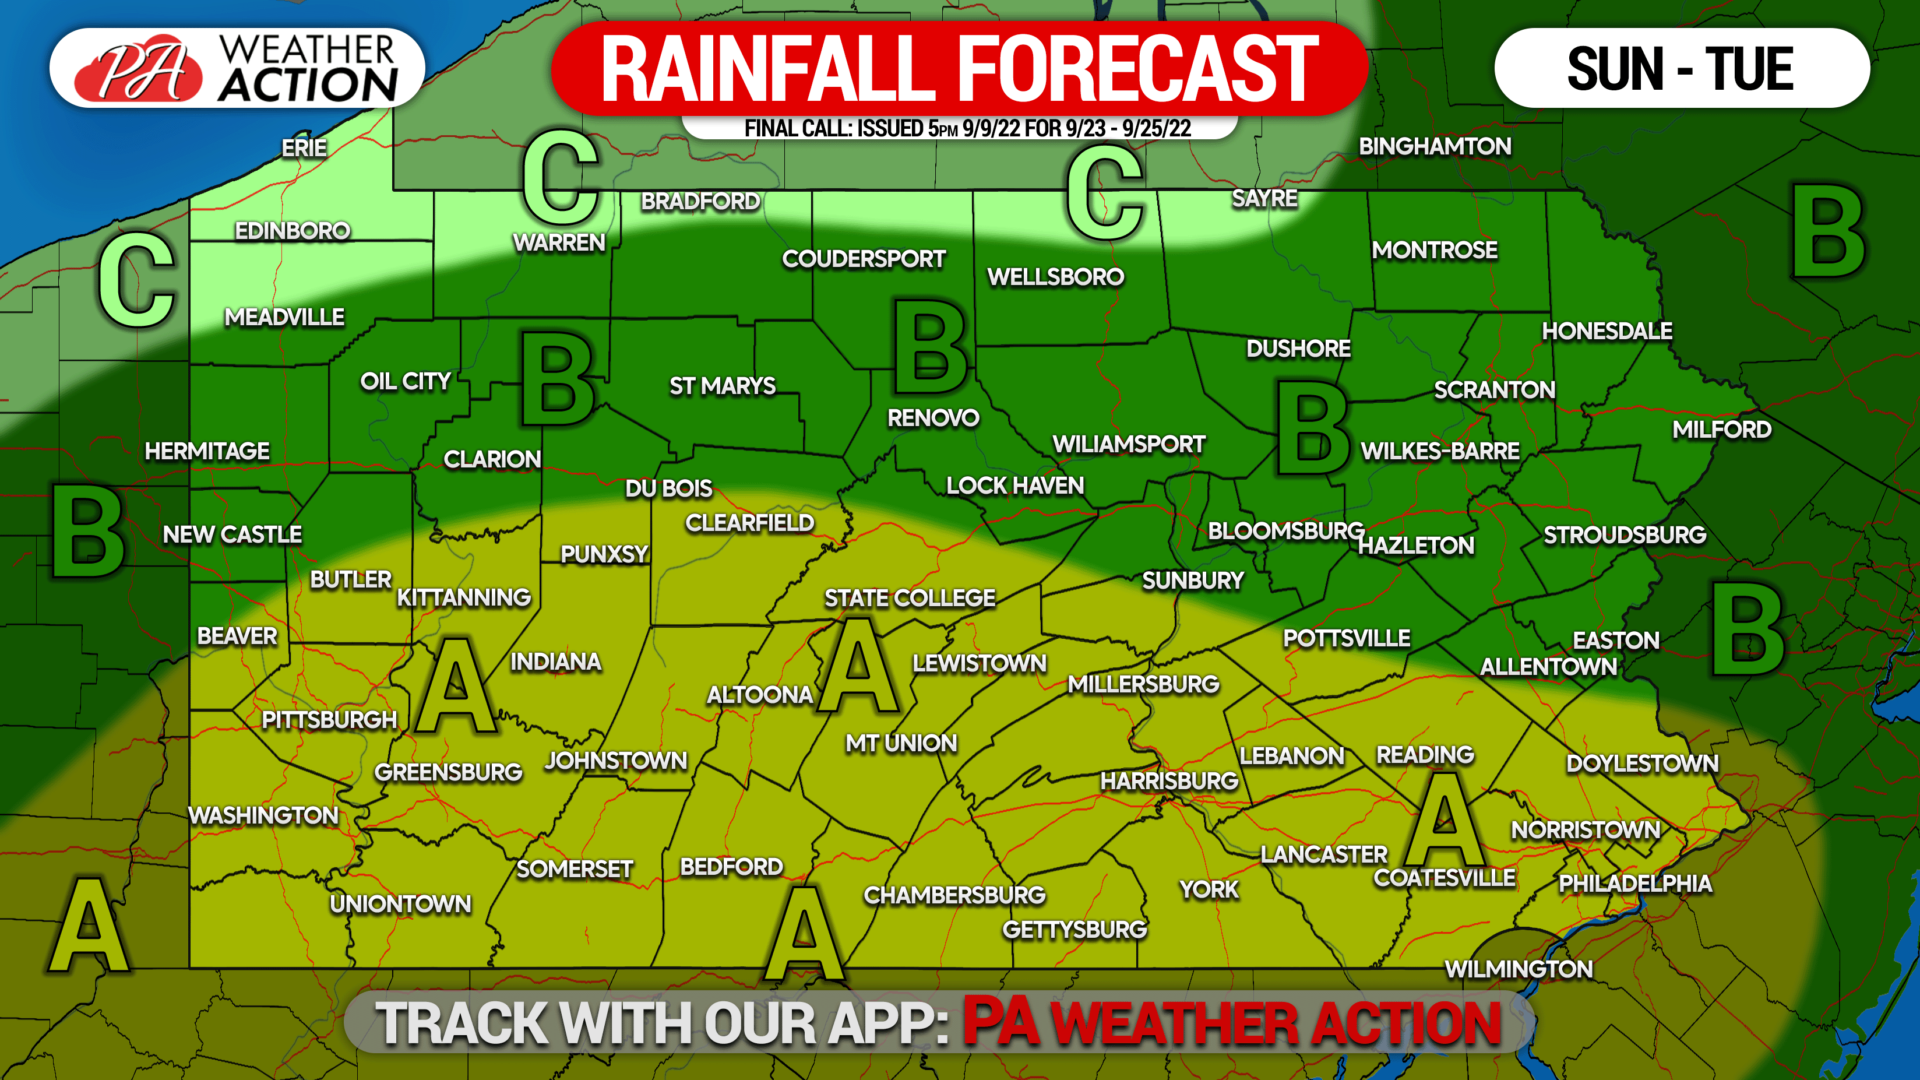 Rainfall Forecast for Late Weekend - Early Next Week; Fall Foliage Implications